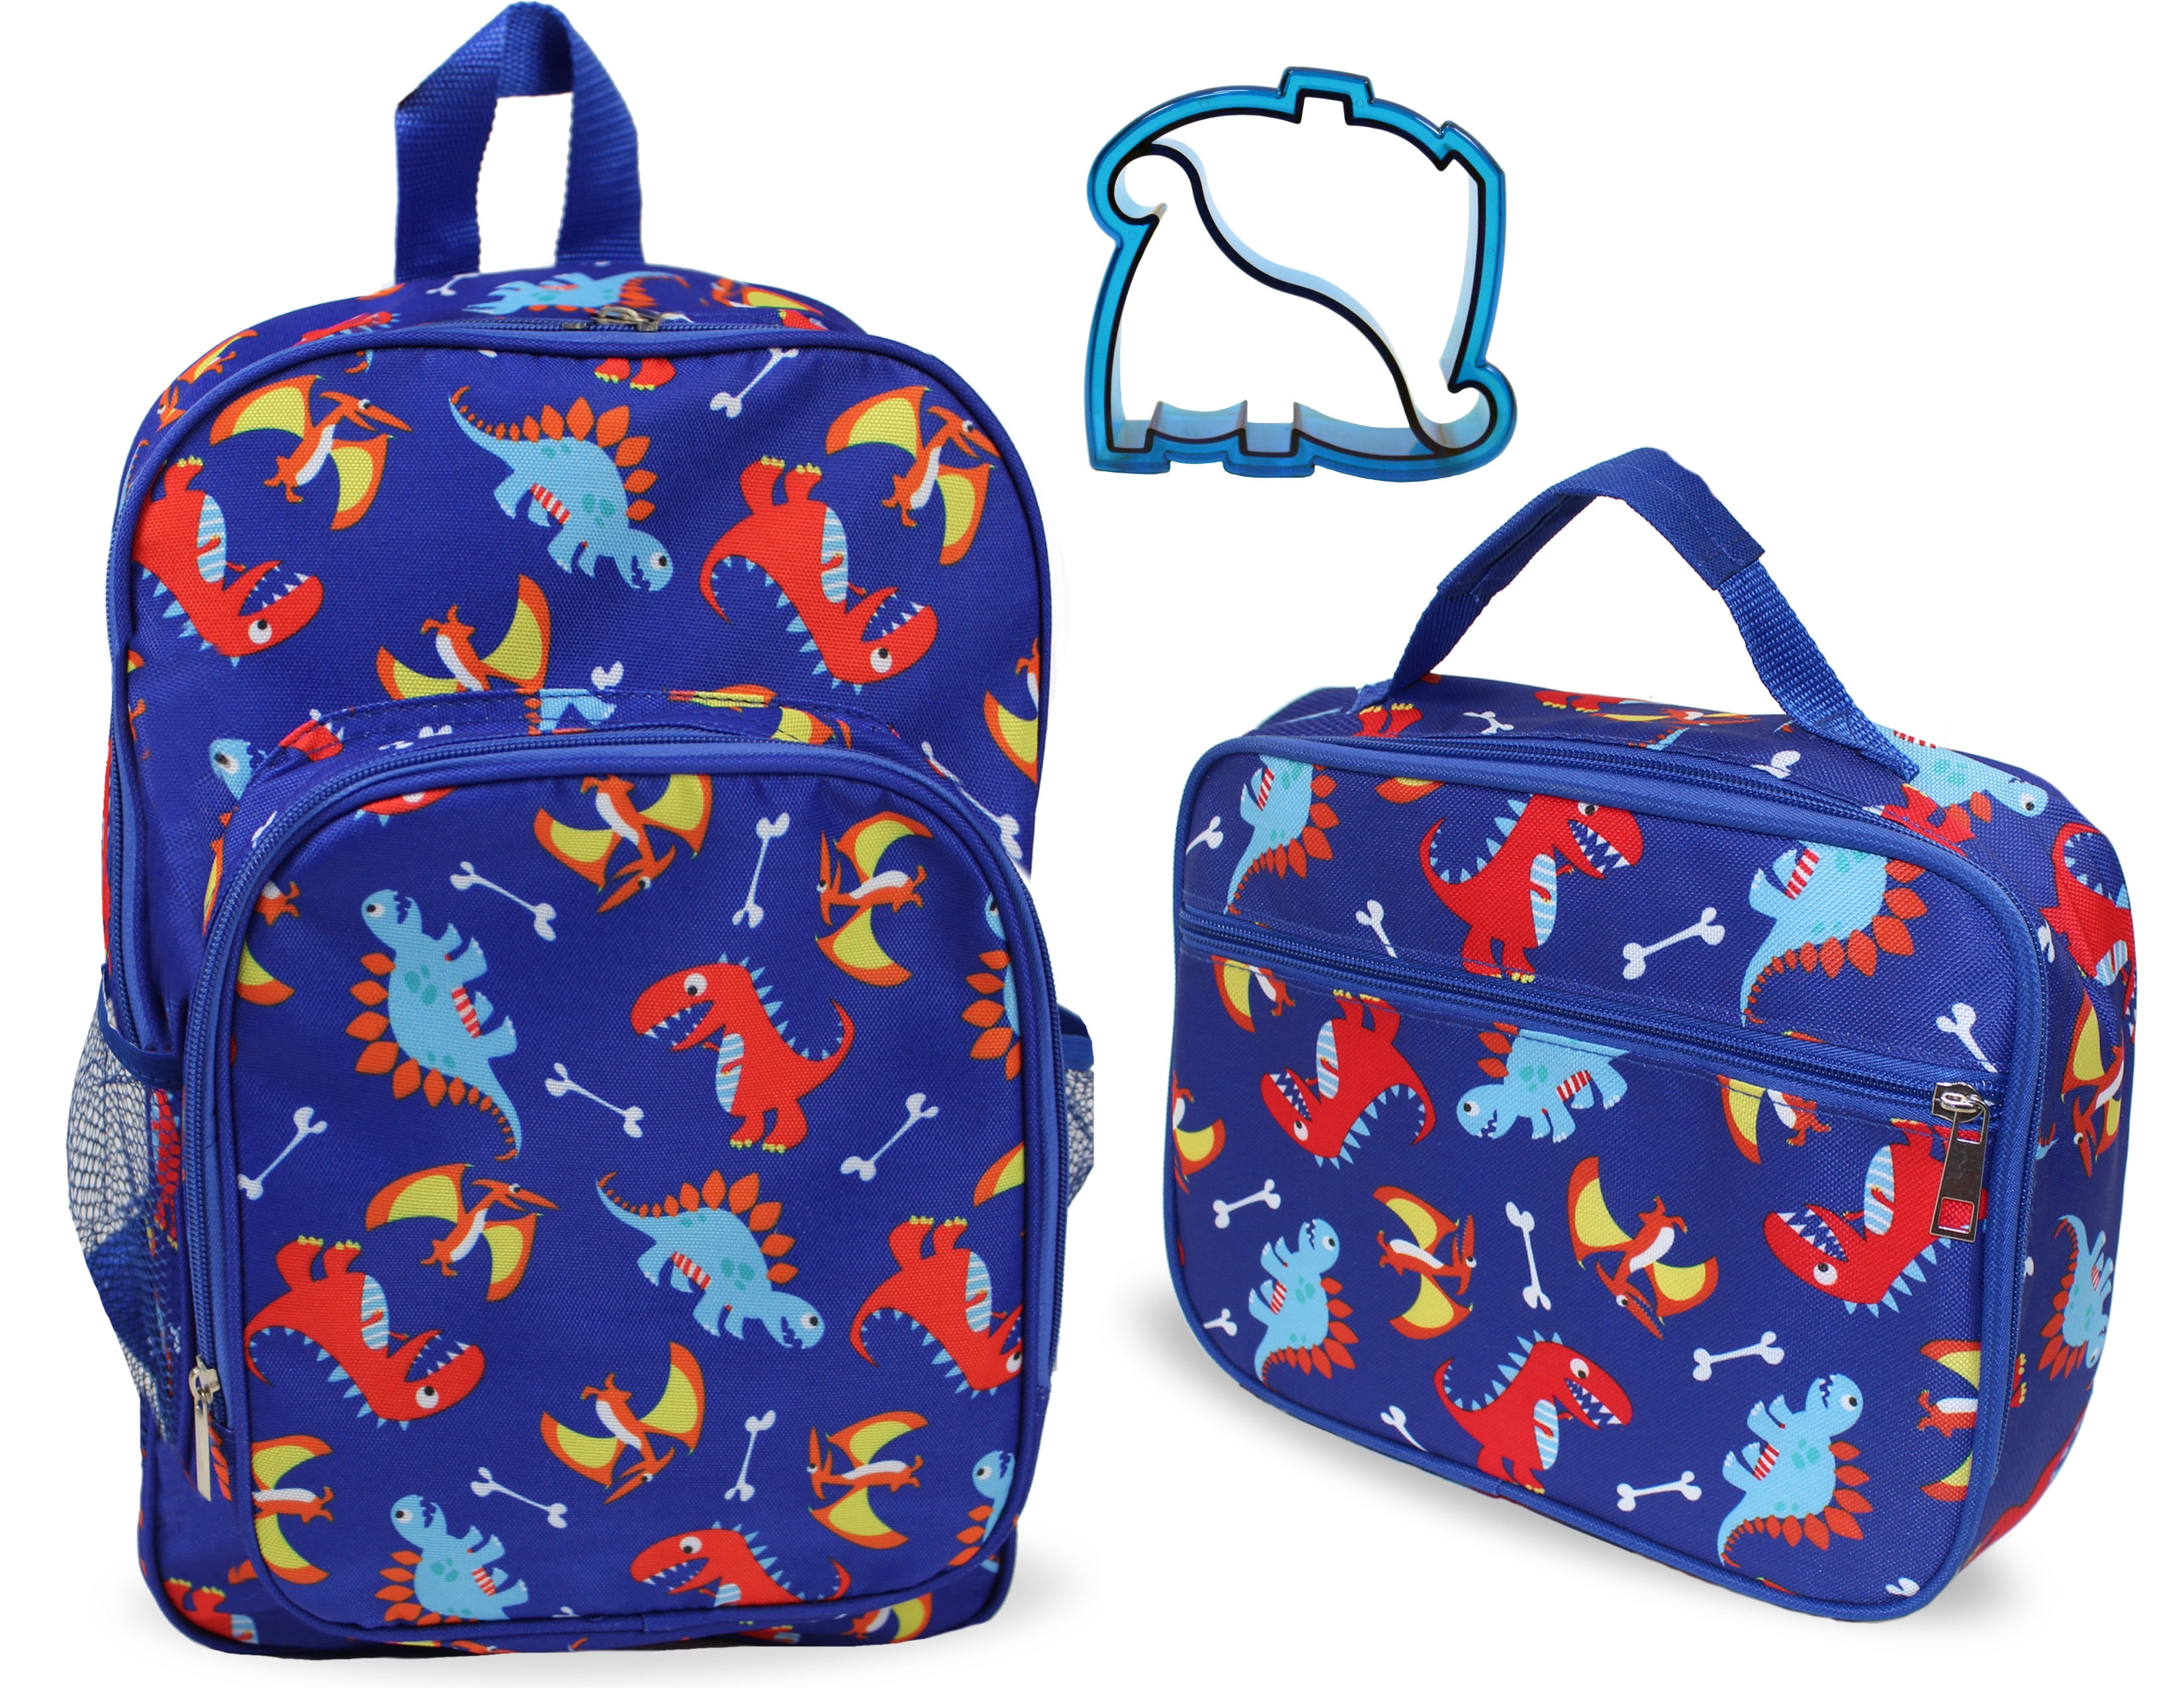 Matching School Bags And Lunch Bags Store, 52% OFF | www.geb.cat